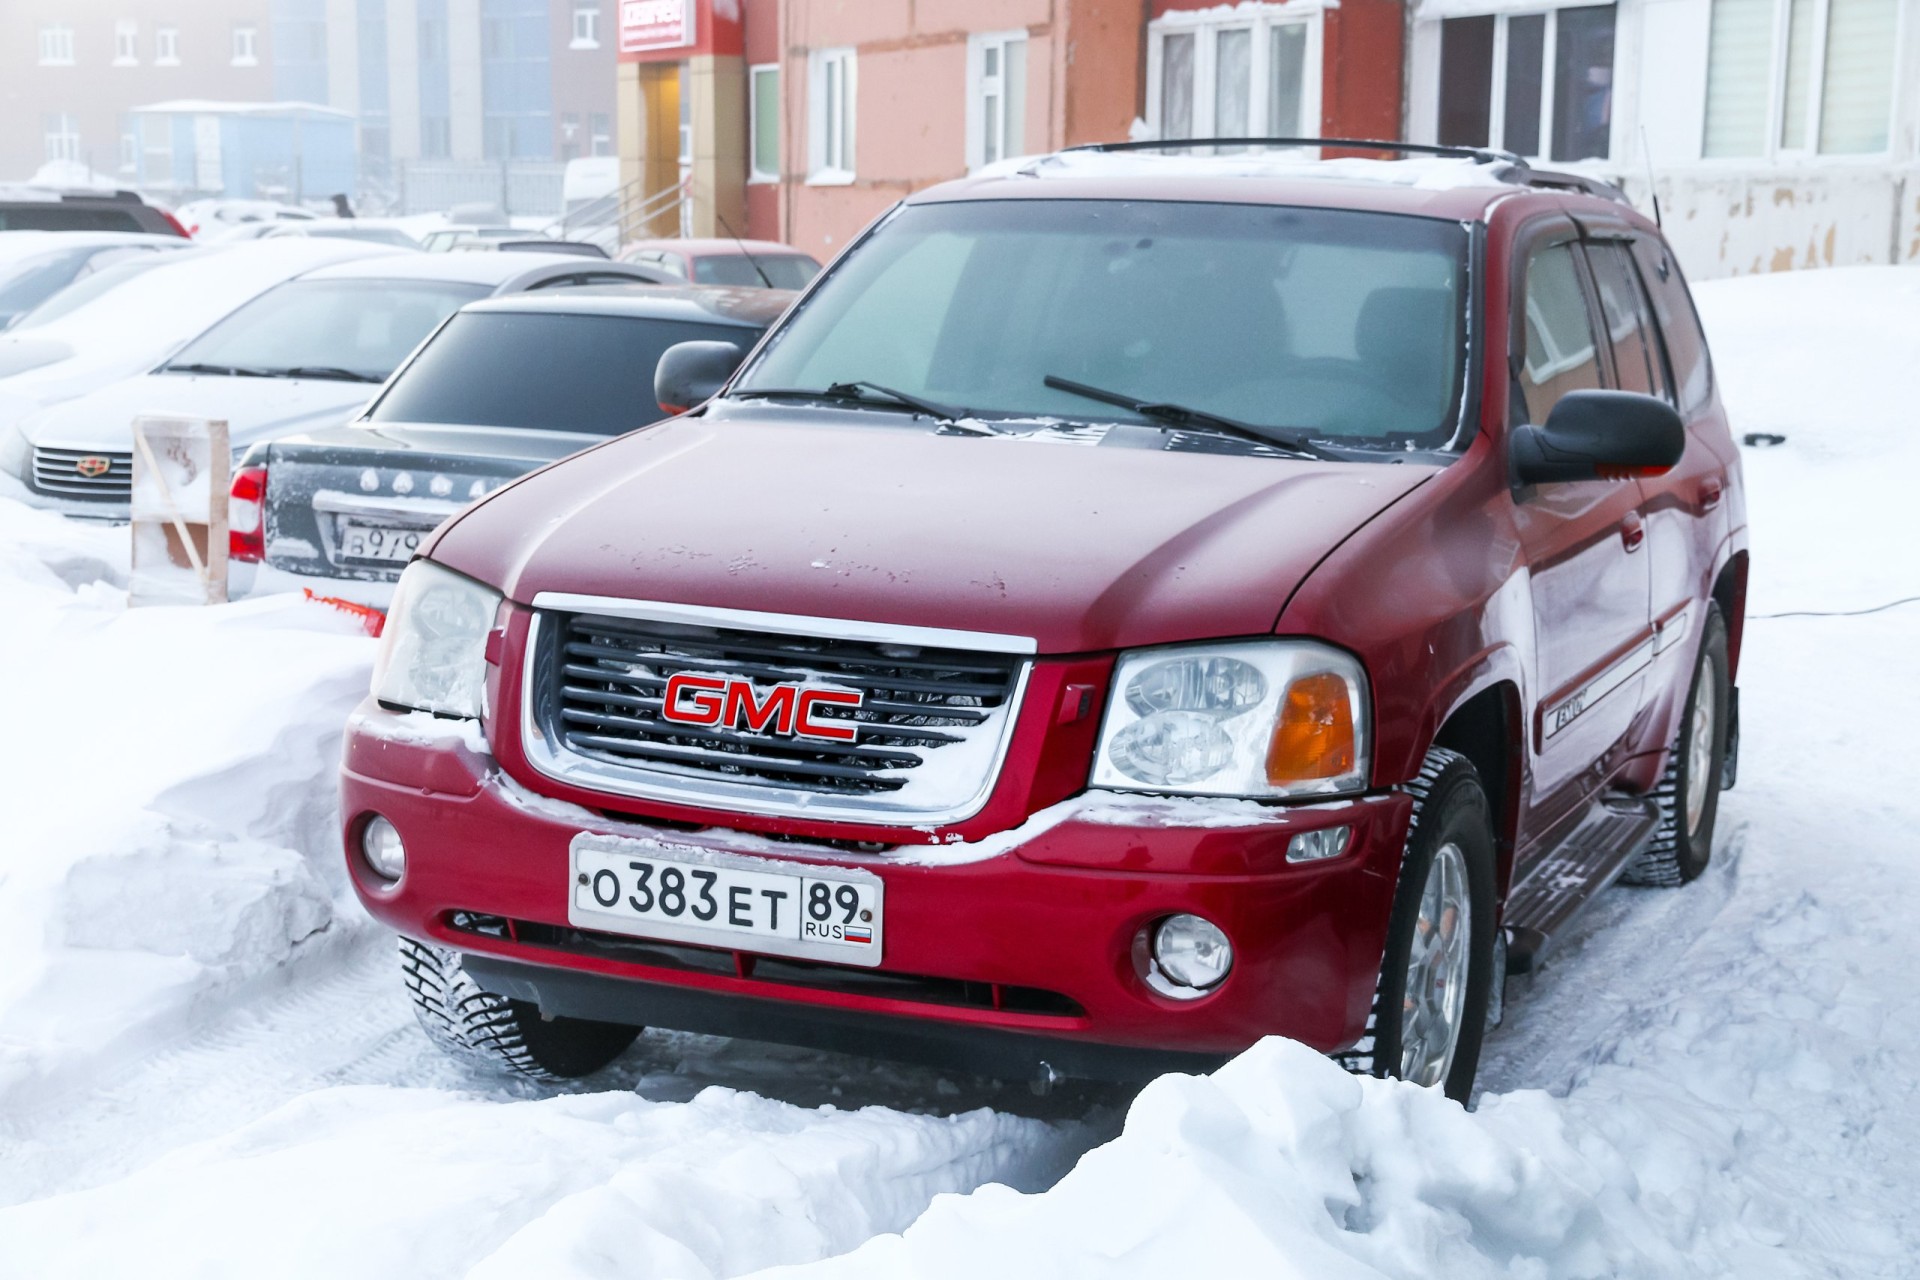 2003 GMC Envoy parked at a snowy residential area